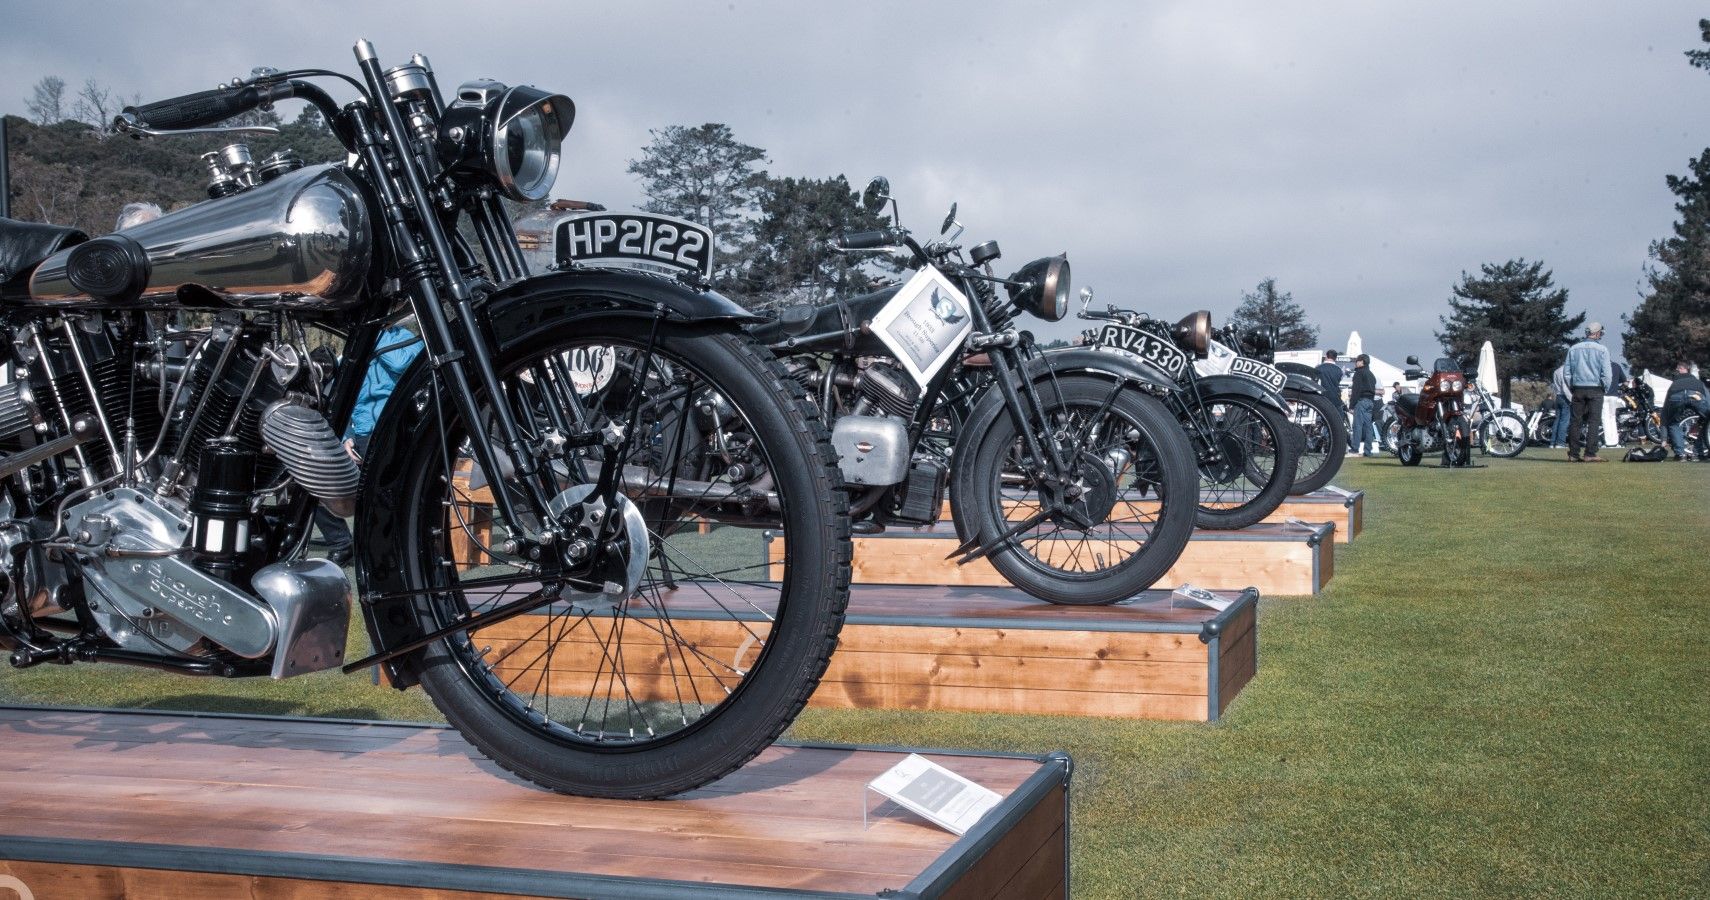 Classic motorcycles from Indian and Harley-Davidson lined at a Quail Motorcycle Gathering